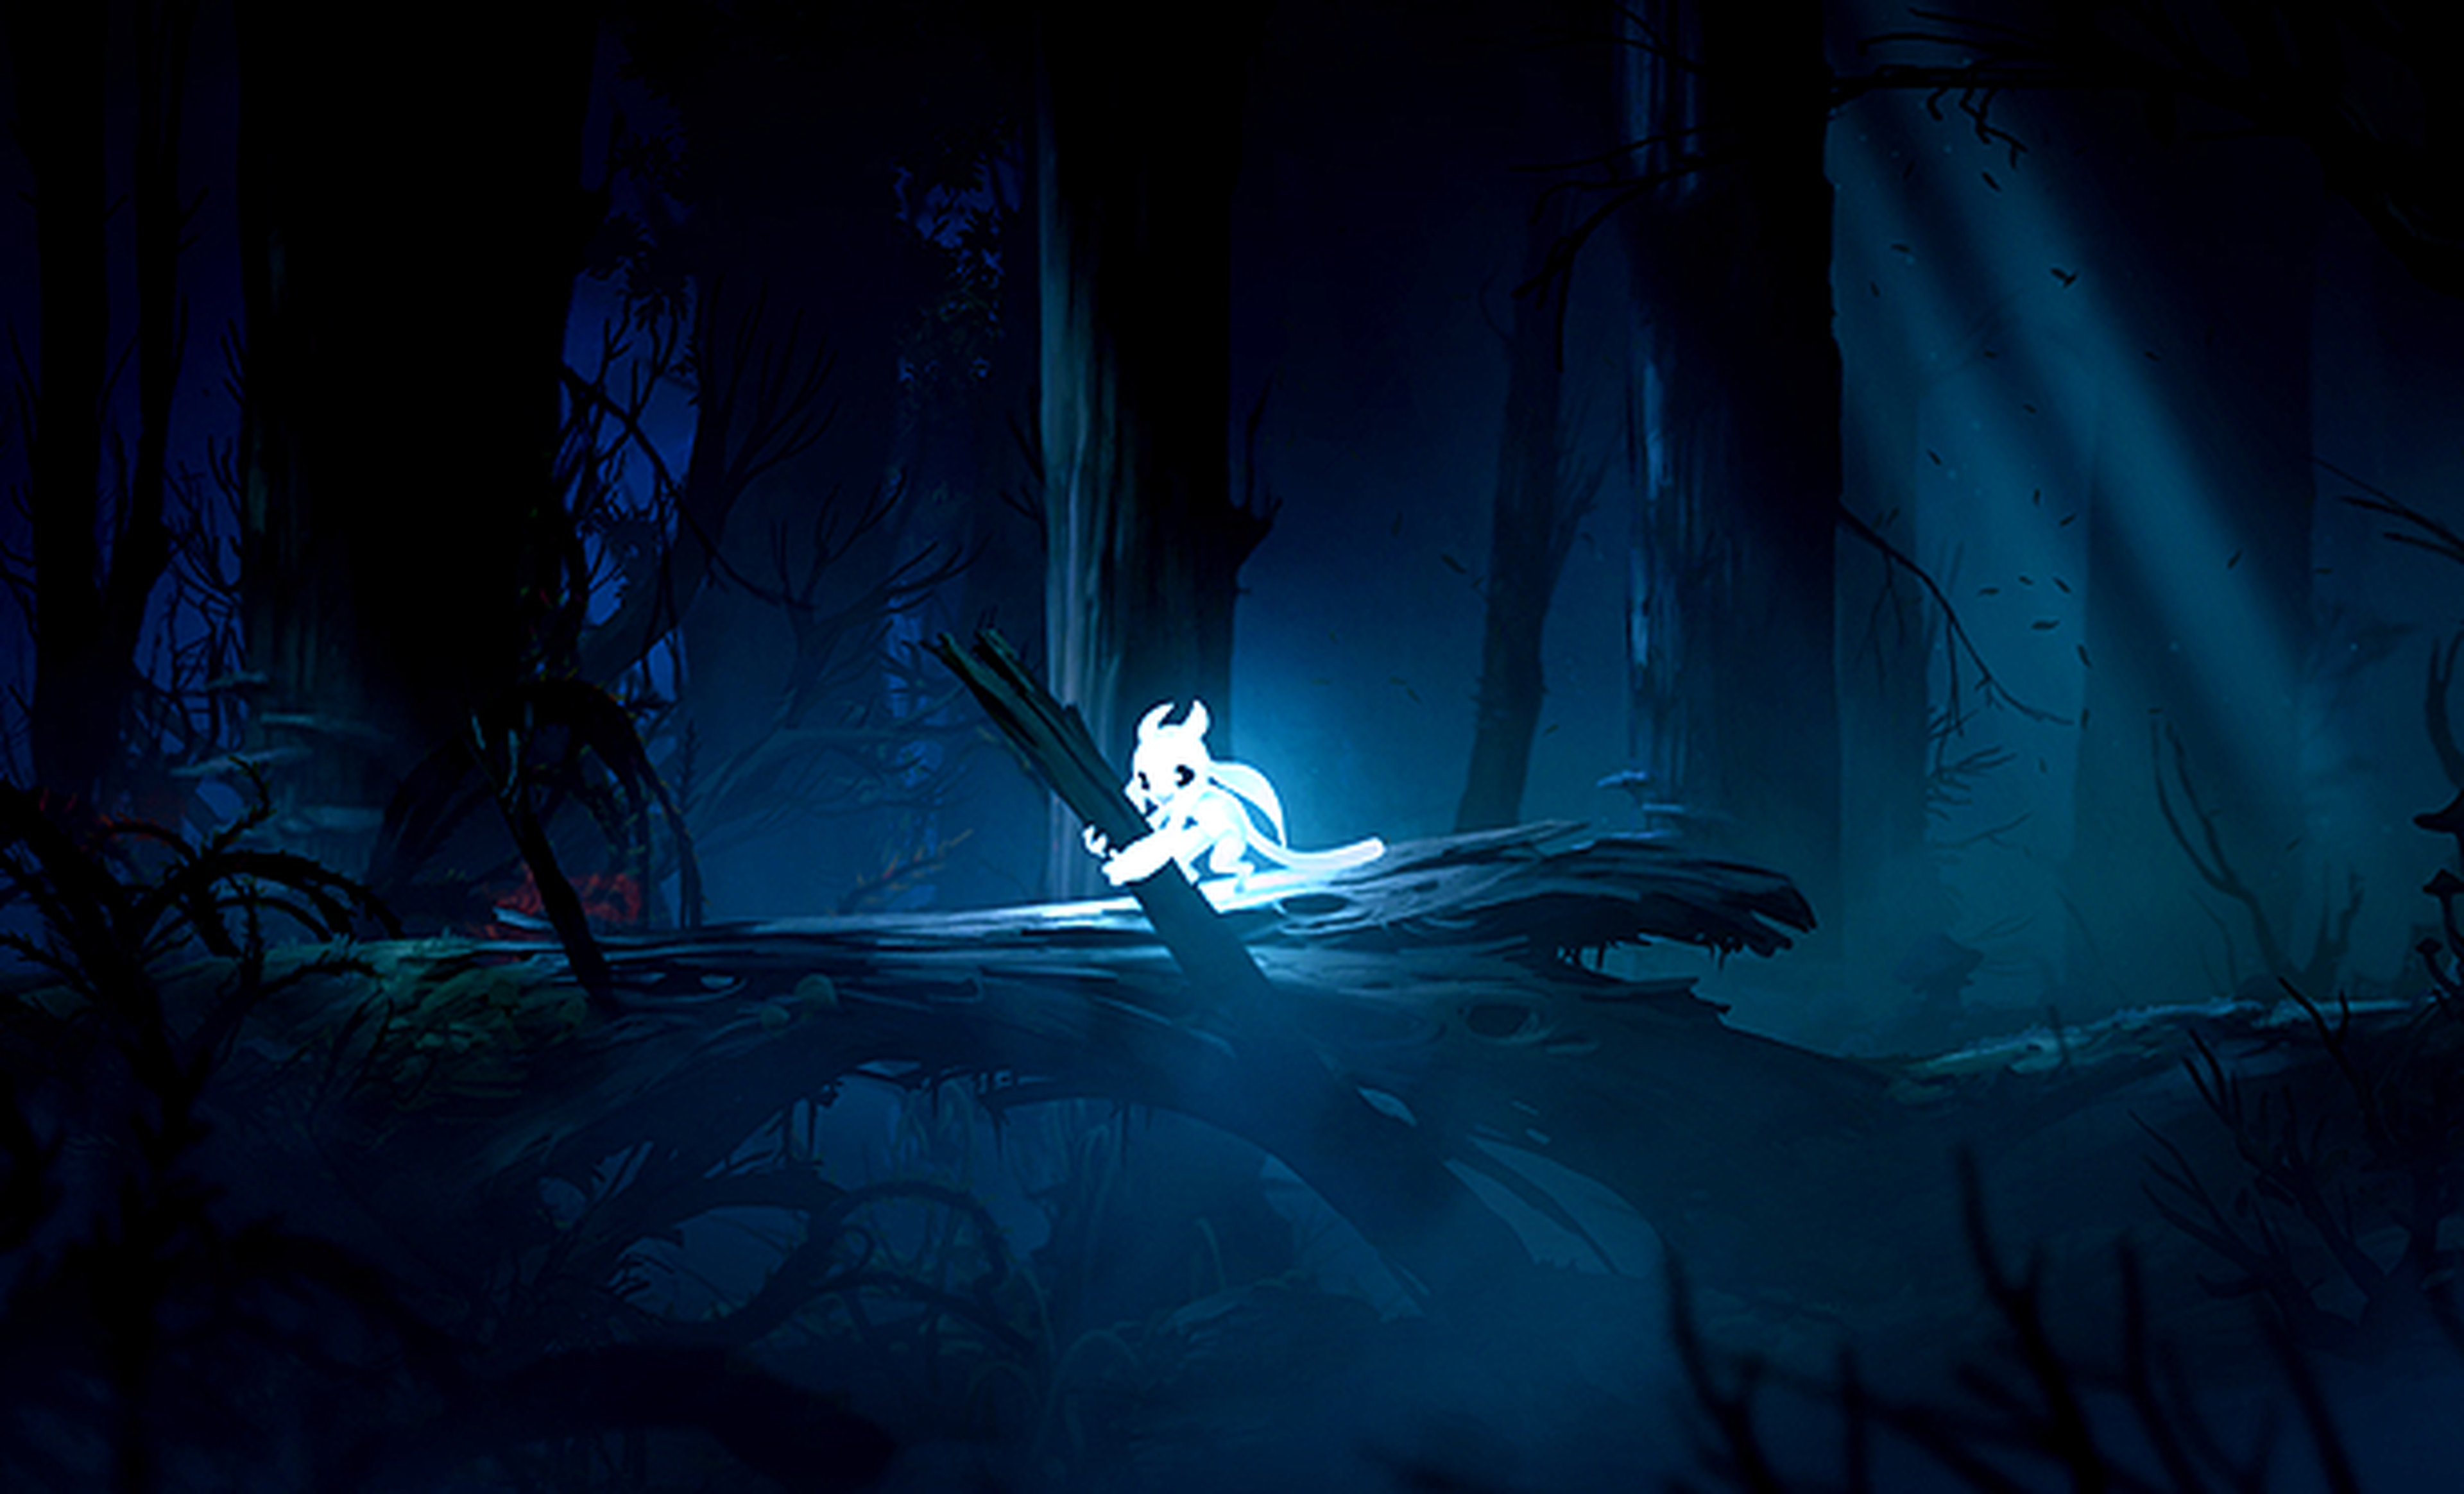 Análisis de Ori and the Blind Forest